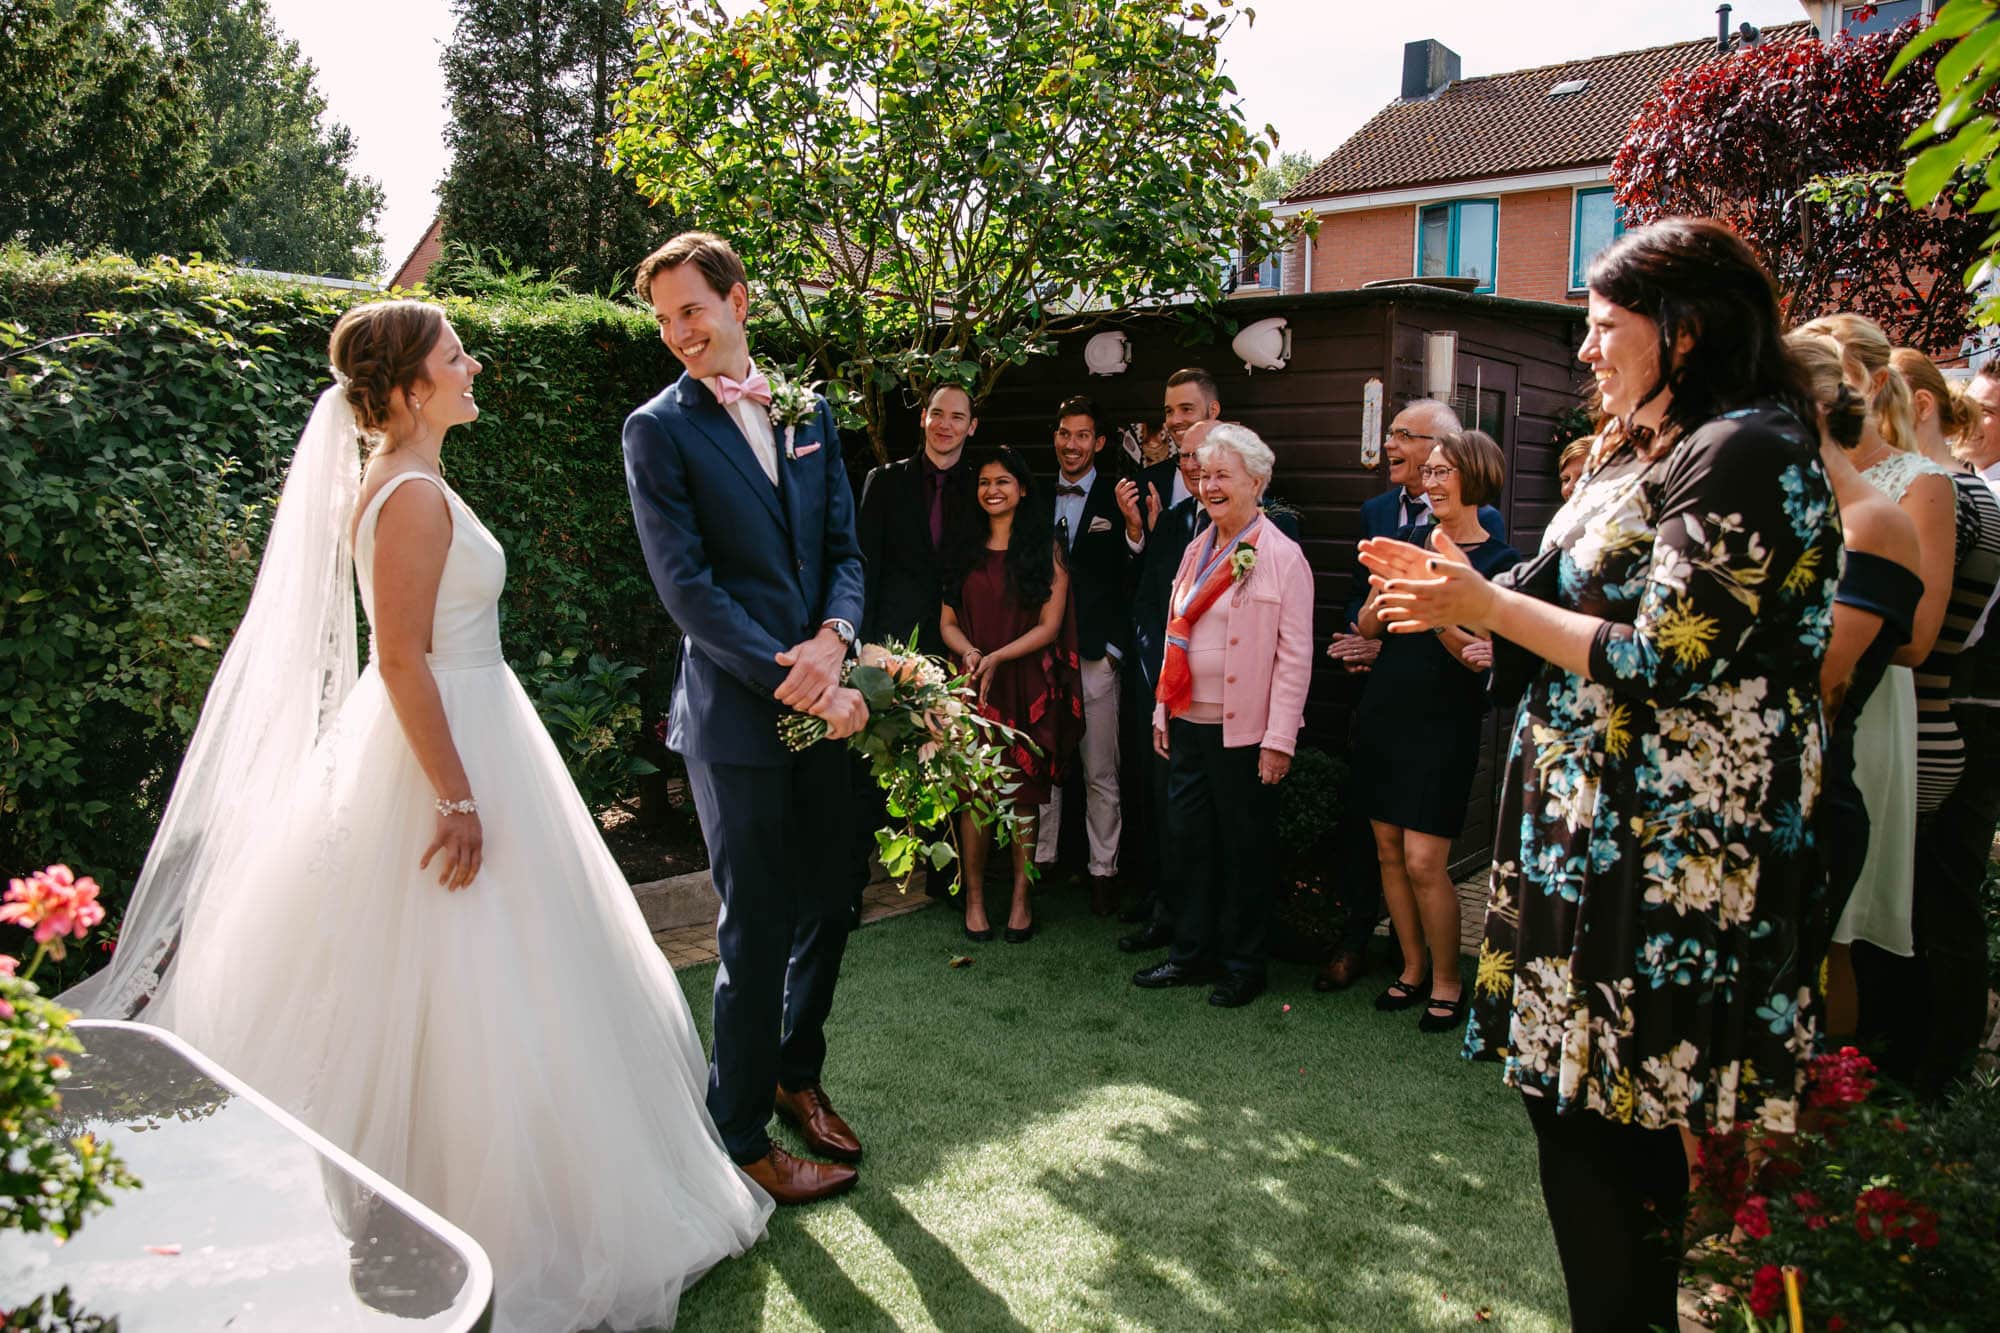 A wedding ceremony in a garden with a bride and groom.